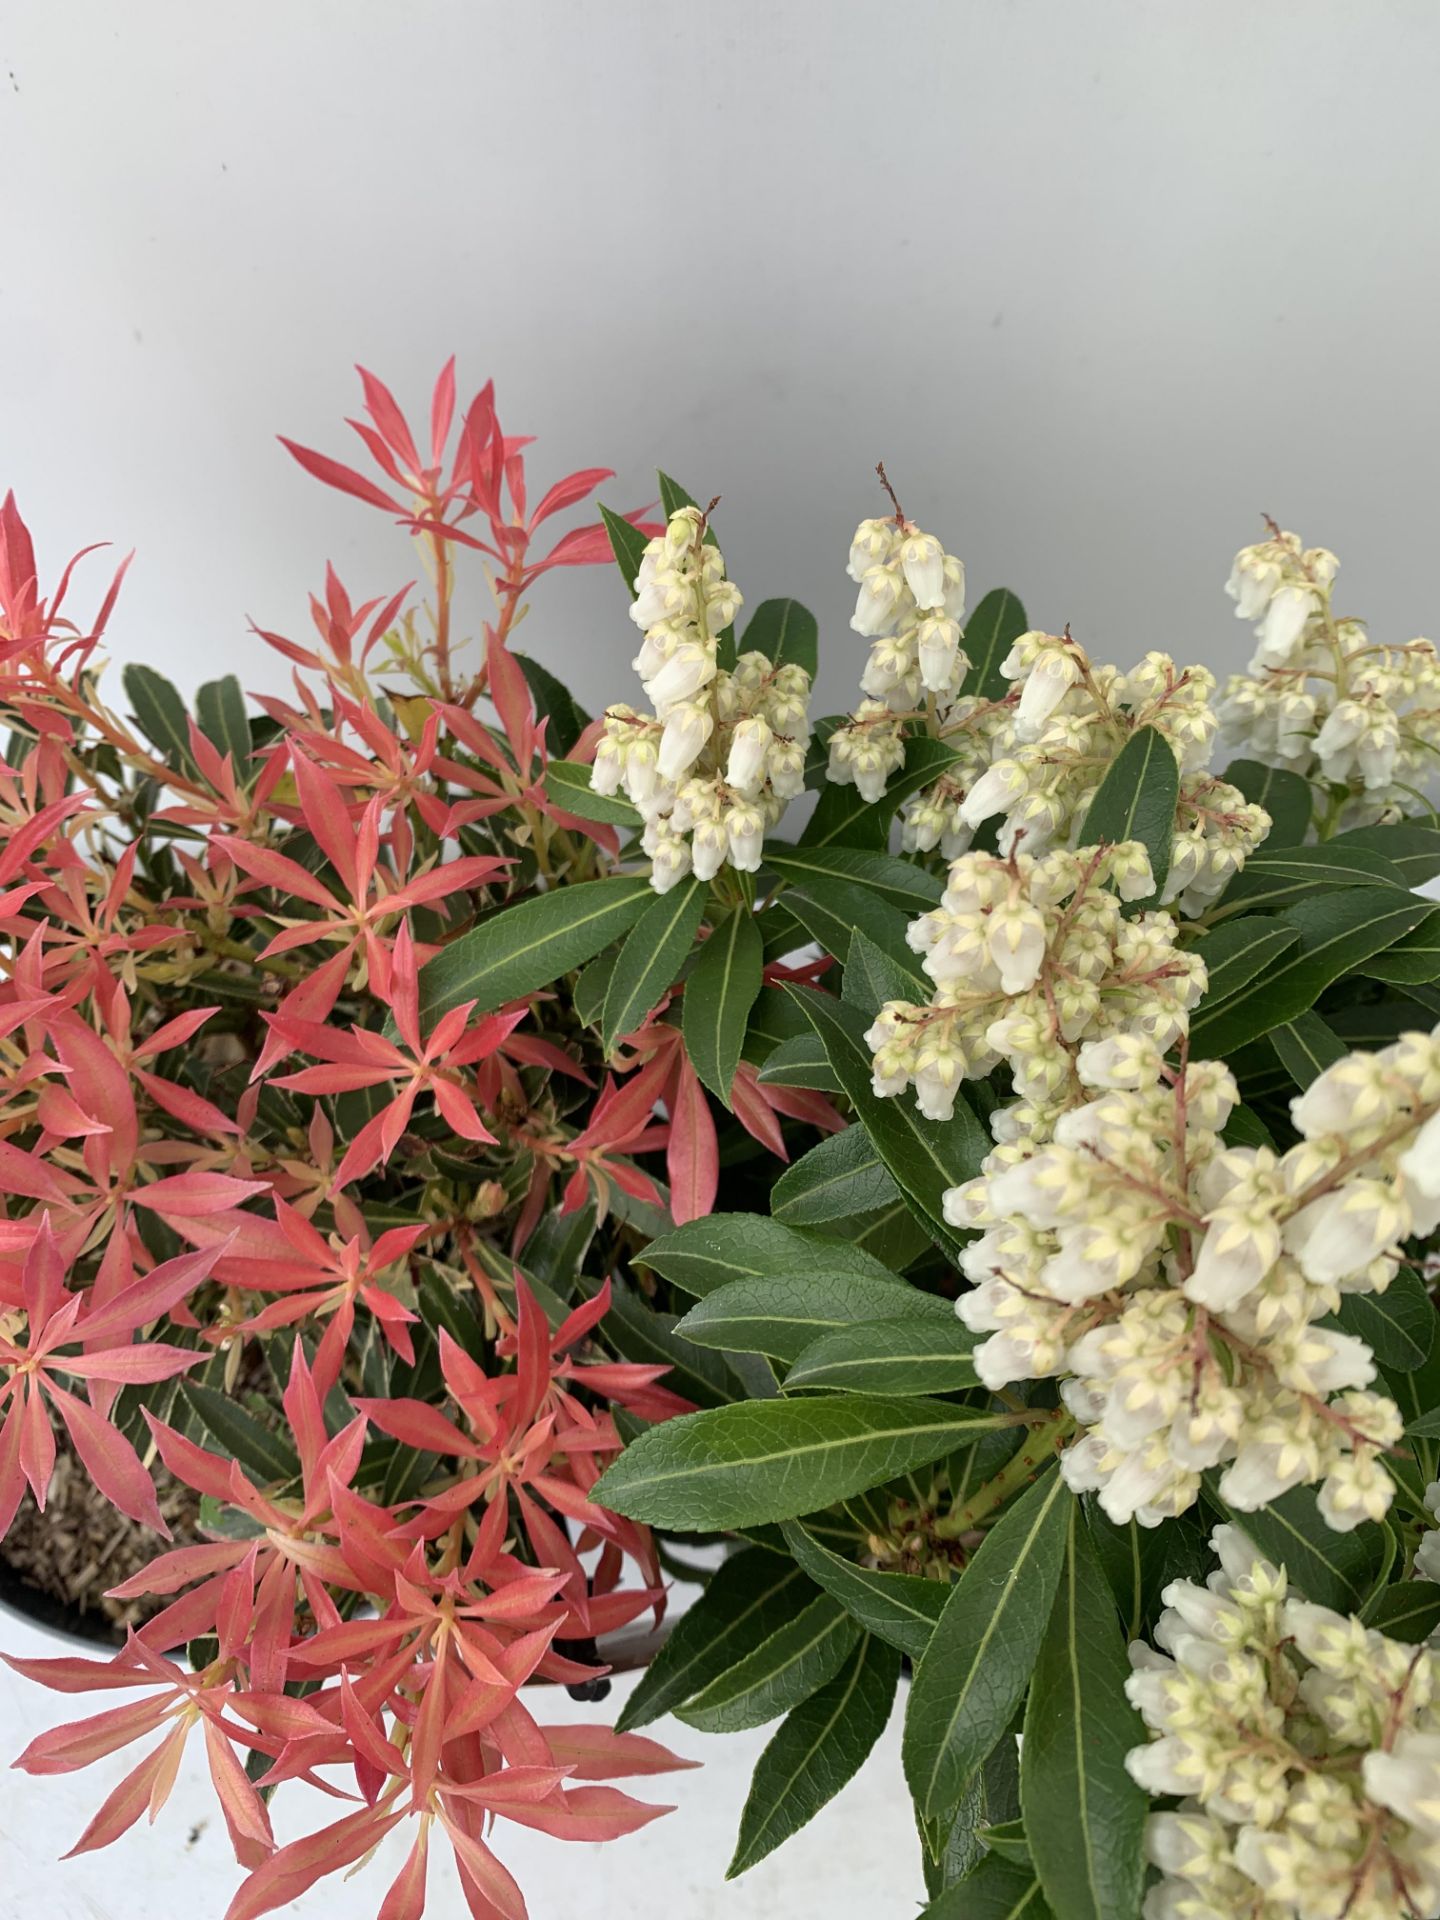 TWO PIERIS JAPONICA FORSET FLAME AND FLAMING SILVER IN 3 LTR POTS 40CM TALL PLUS VAT TO BE SOLD - Image 7 of 12